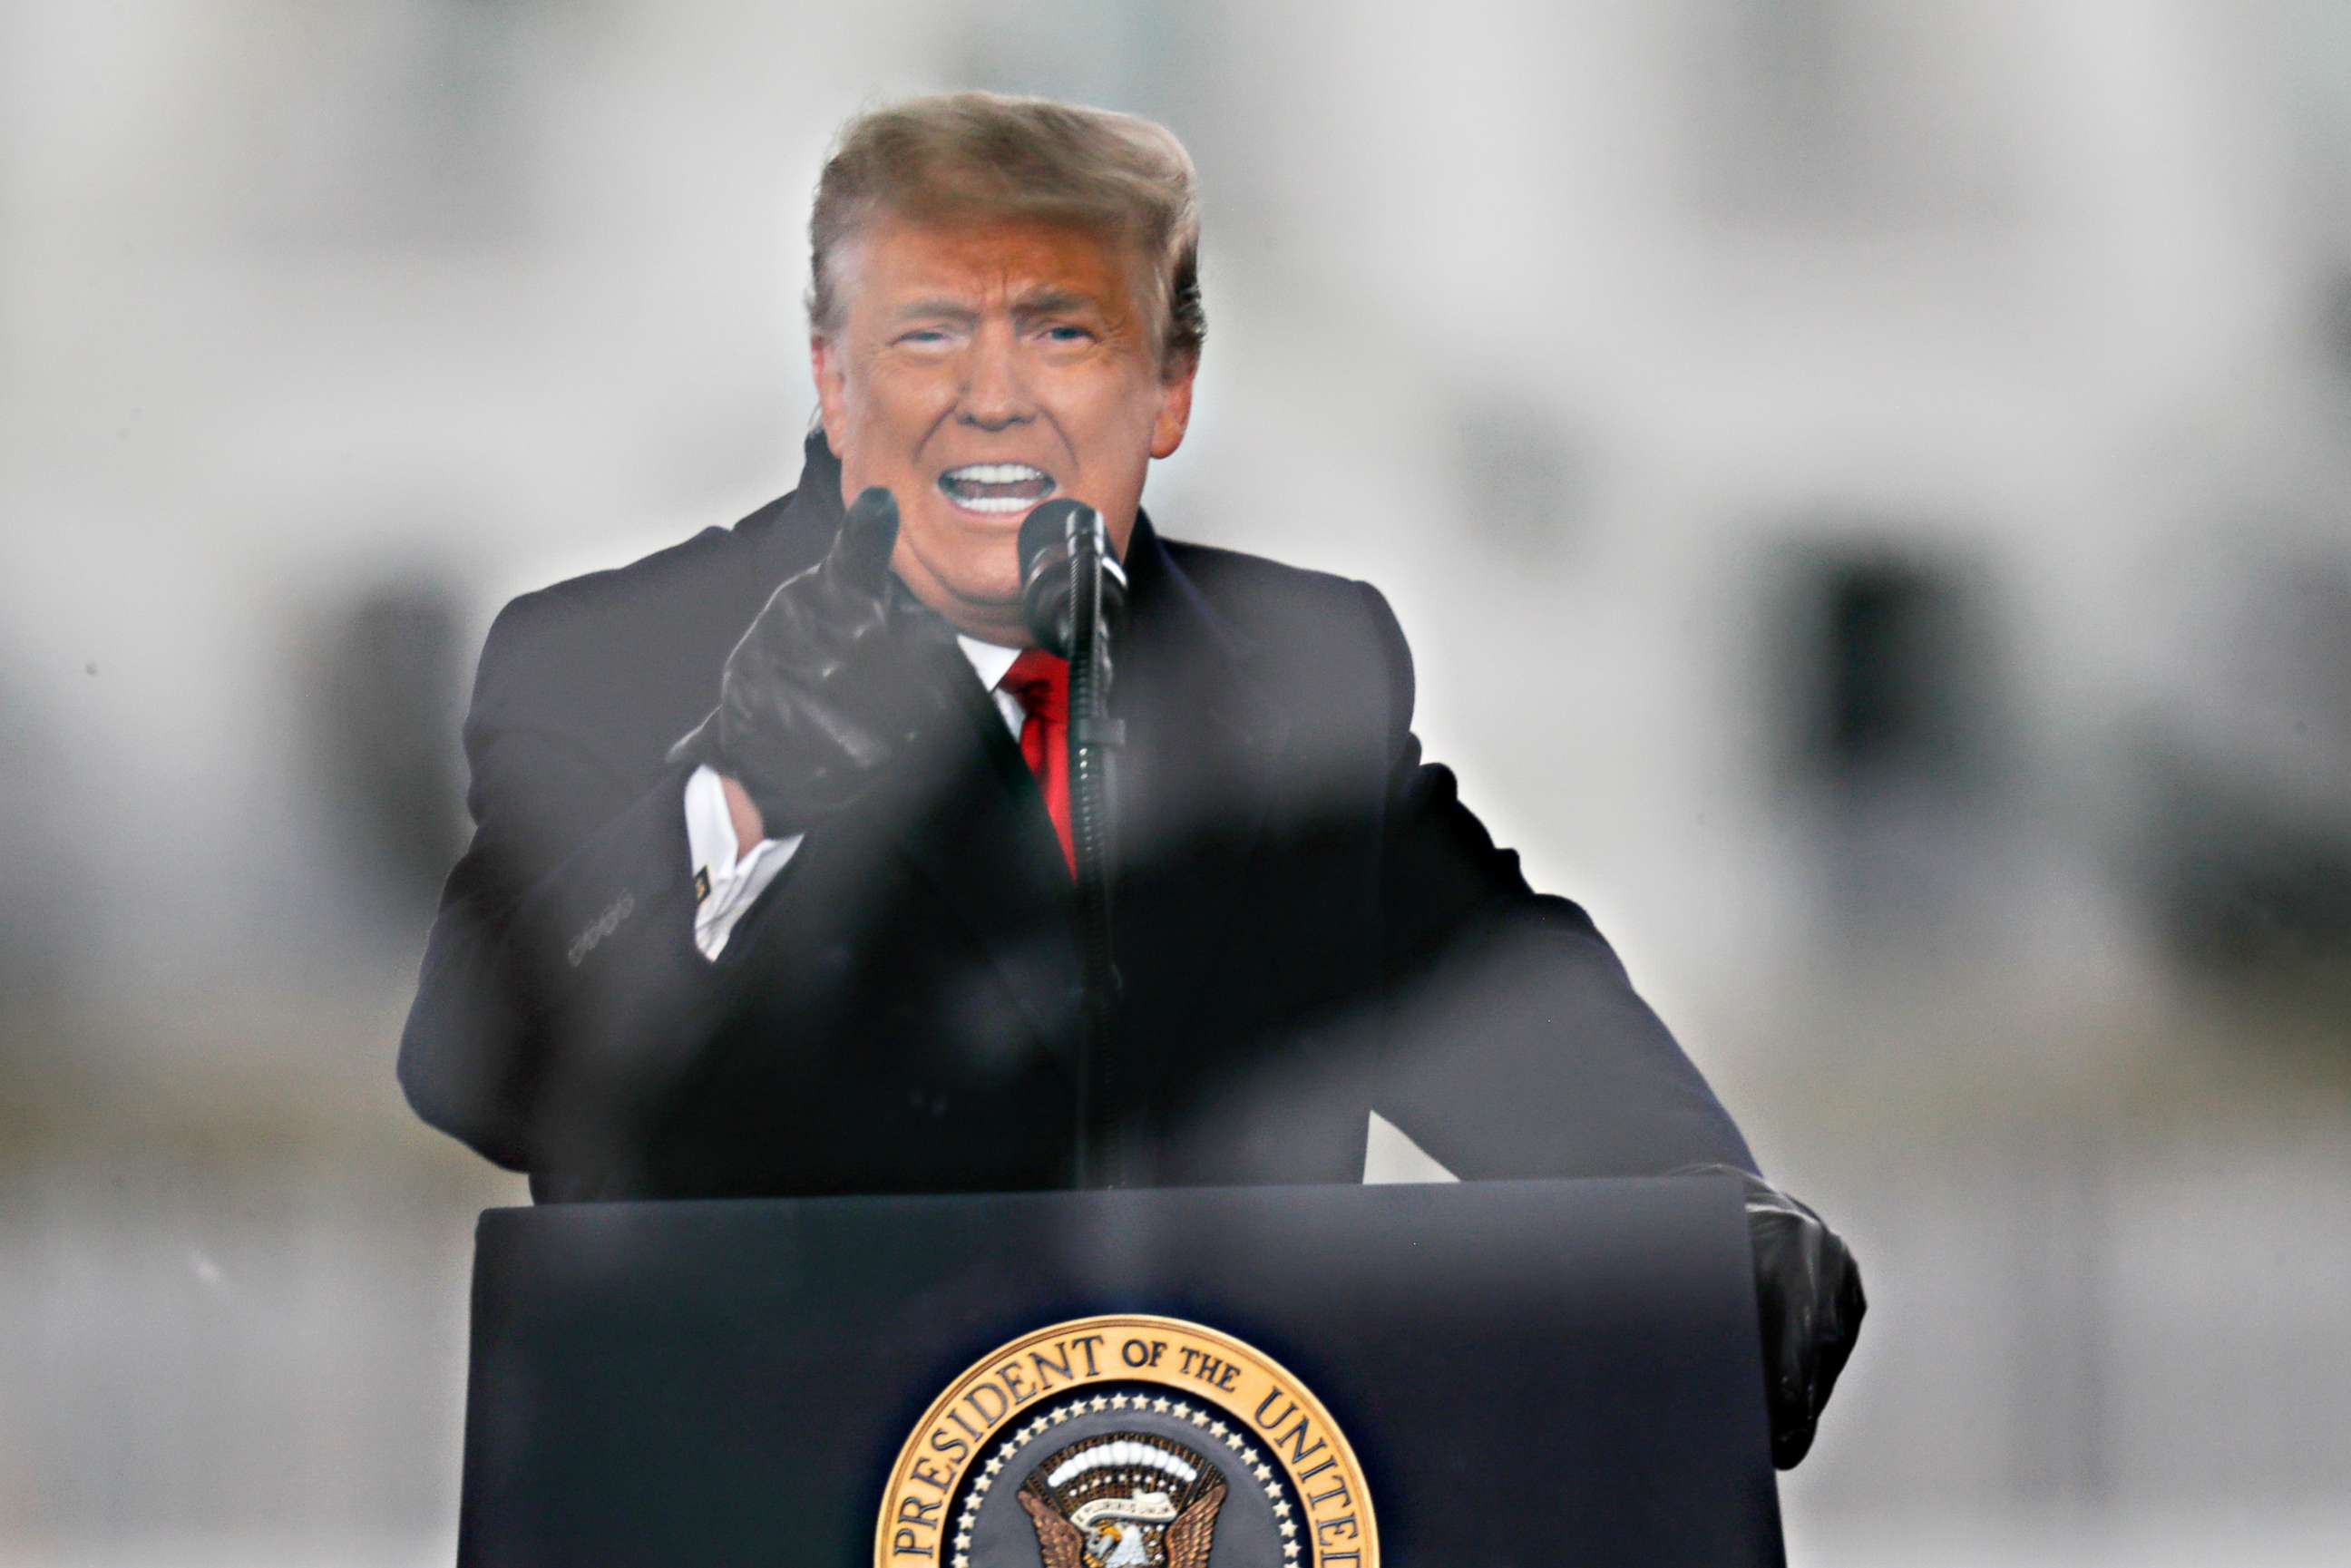 PHOTO: President Donald Trump gestures as he speaks during a rally to contest the certification of the 2020 presidential election results by the U.S. Congress, in Washington, Jan. 6, 2021.